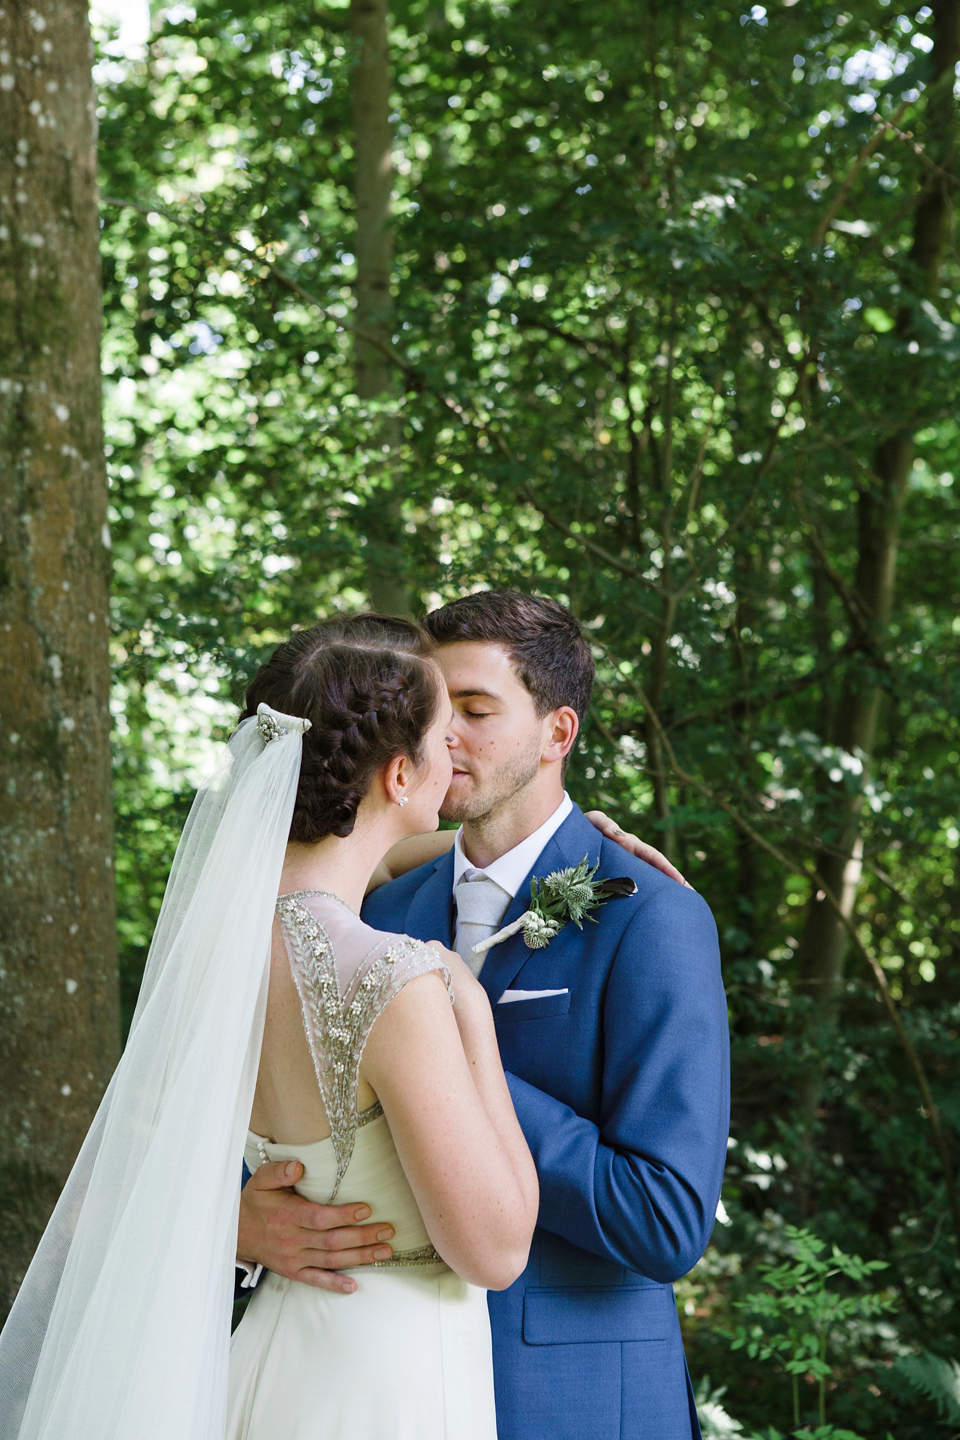 A glamorous Gwendolynne gown for a Summer garden party wedding. Photography by Lucy Davenport.